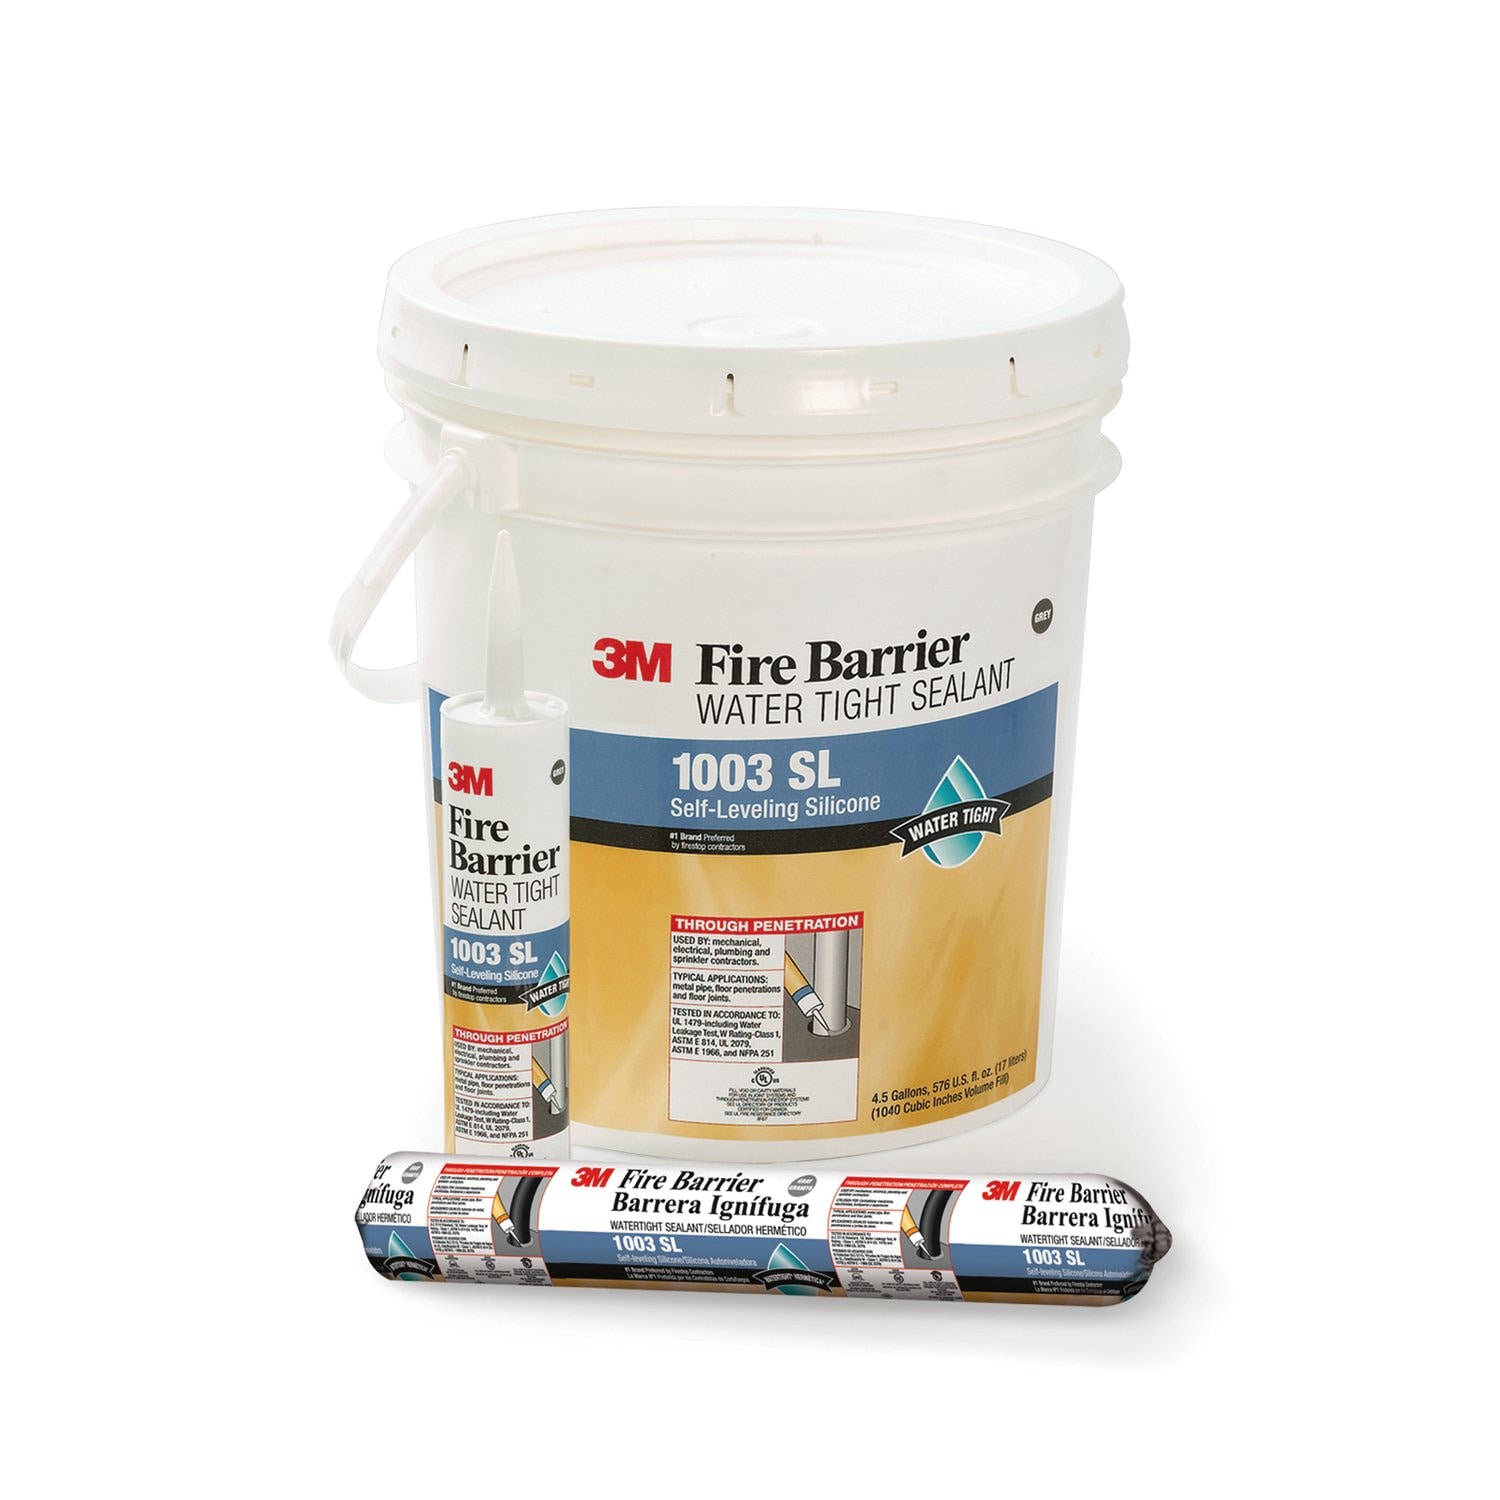 7000059414 - 3M Fire Barrier Water Tight Sealant 1003 SL, Gray, 20 fl oz Sausage
Pack, 12/Case